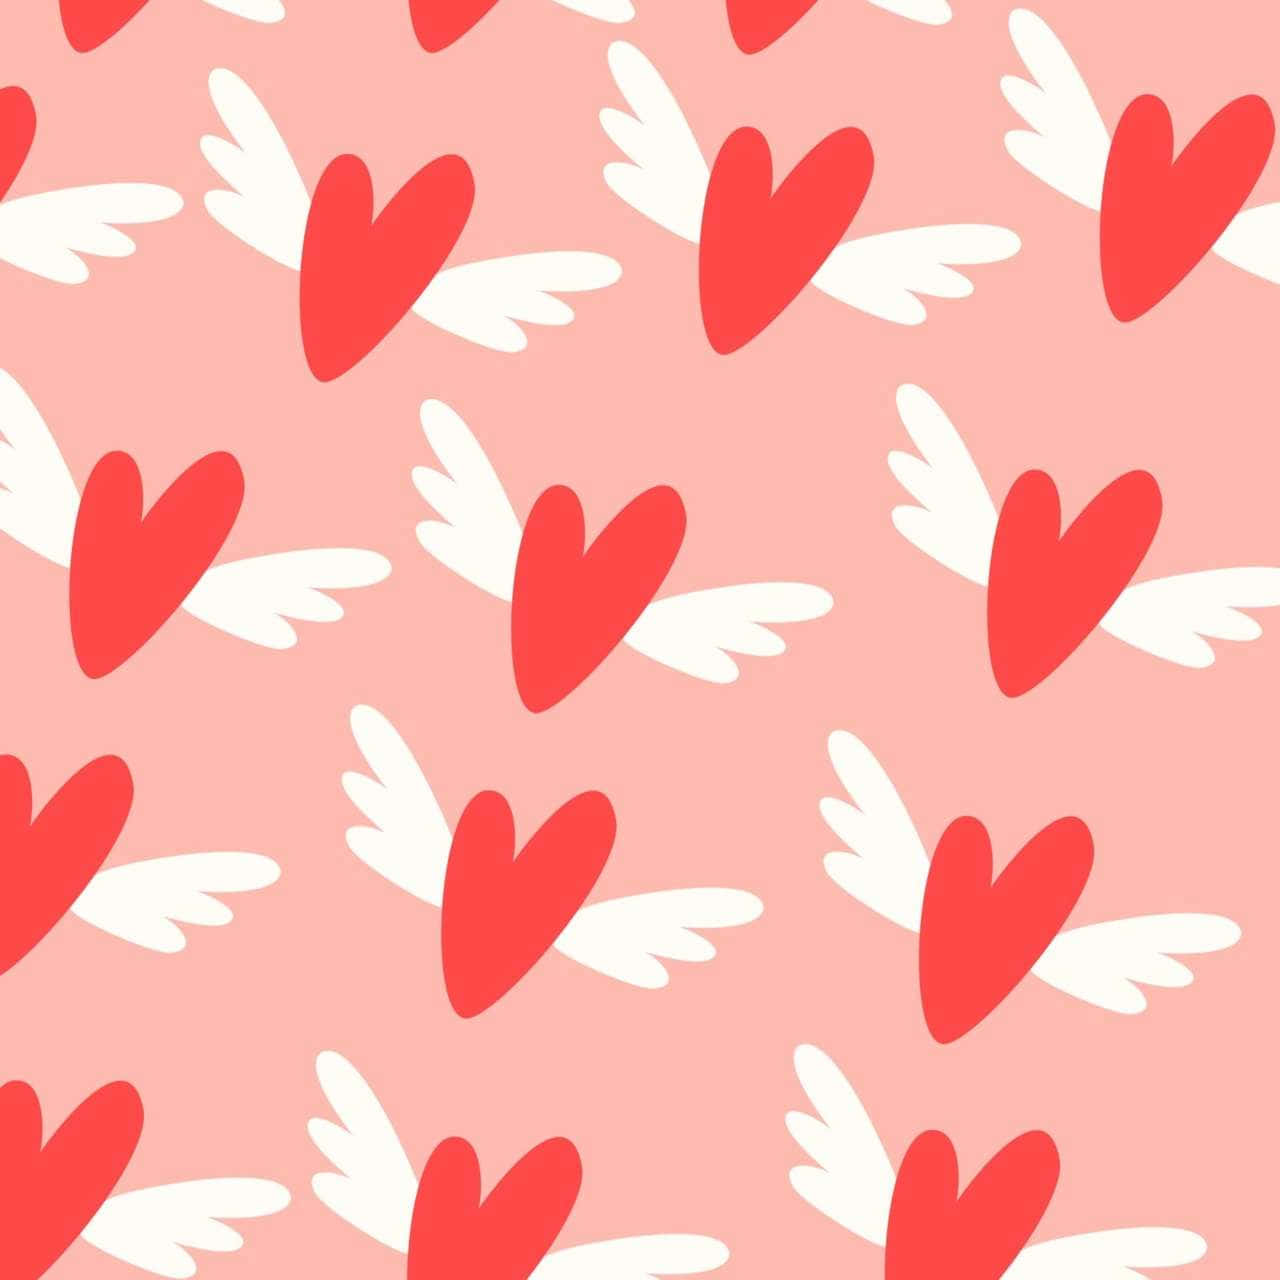 Lovecore Winged Hearts Pattern